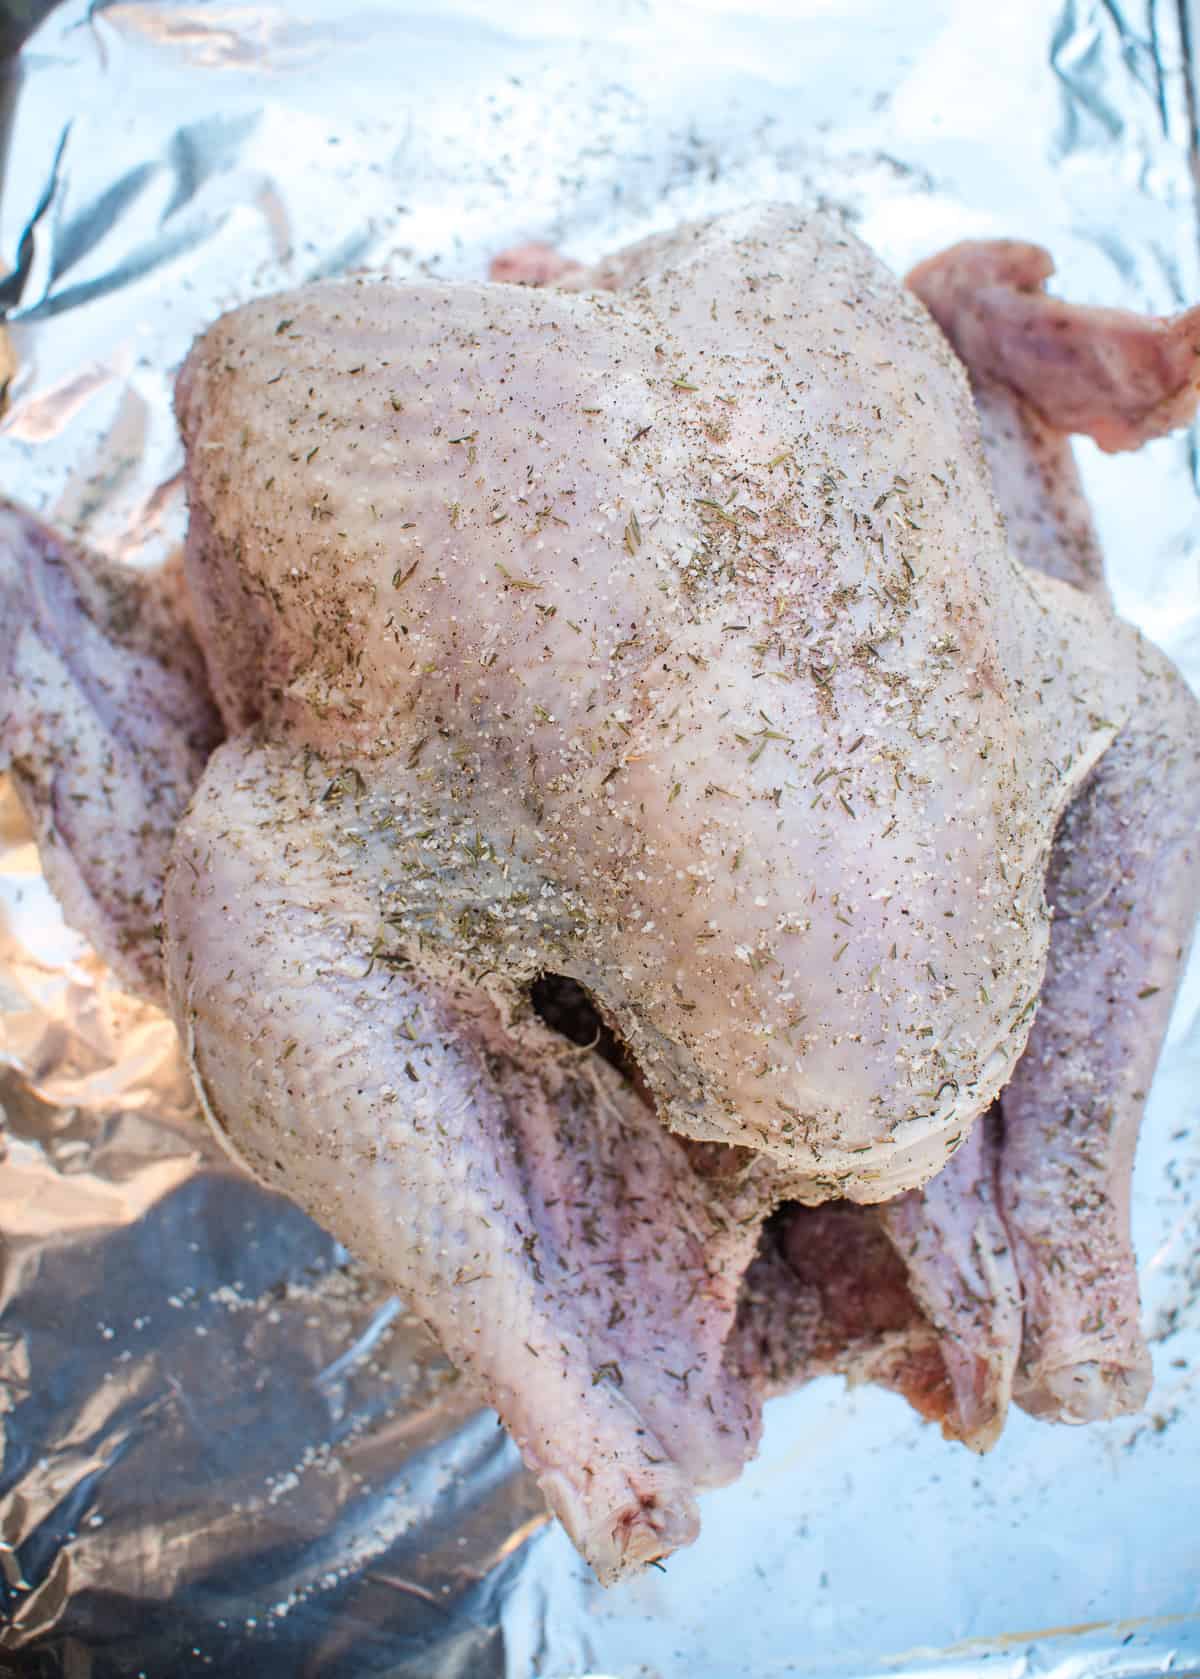 The turkey coated with the dry brine.